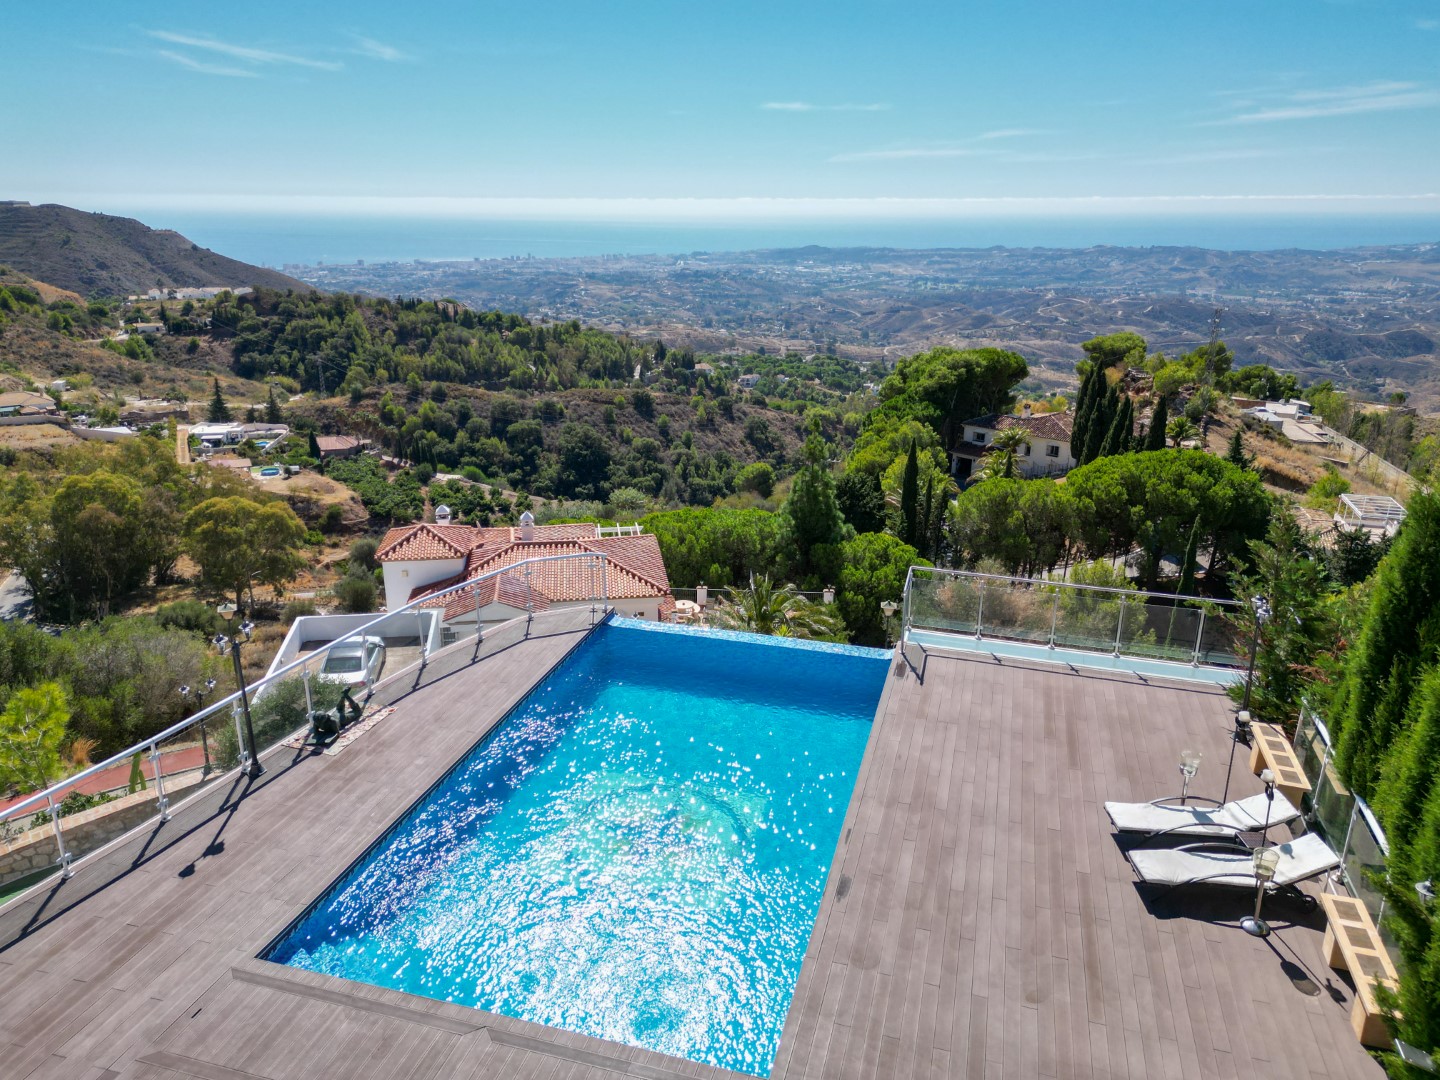 INDEPENDENT VILLA AND APARTMENT FOR SALE IN URB VALTOCADO MIJAS